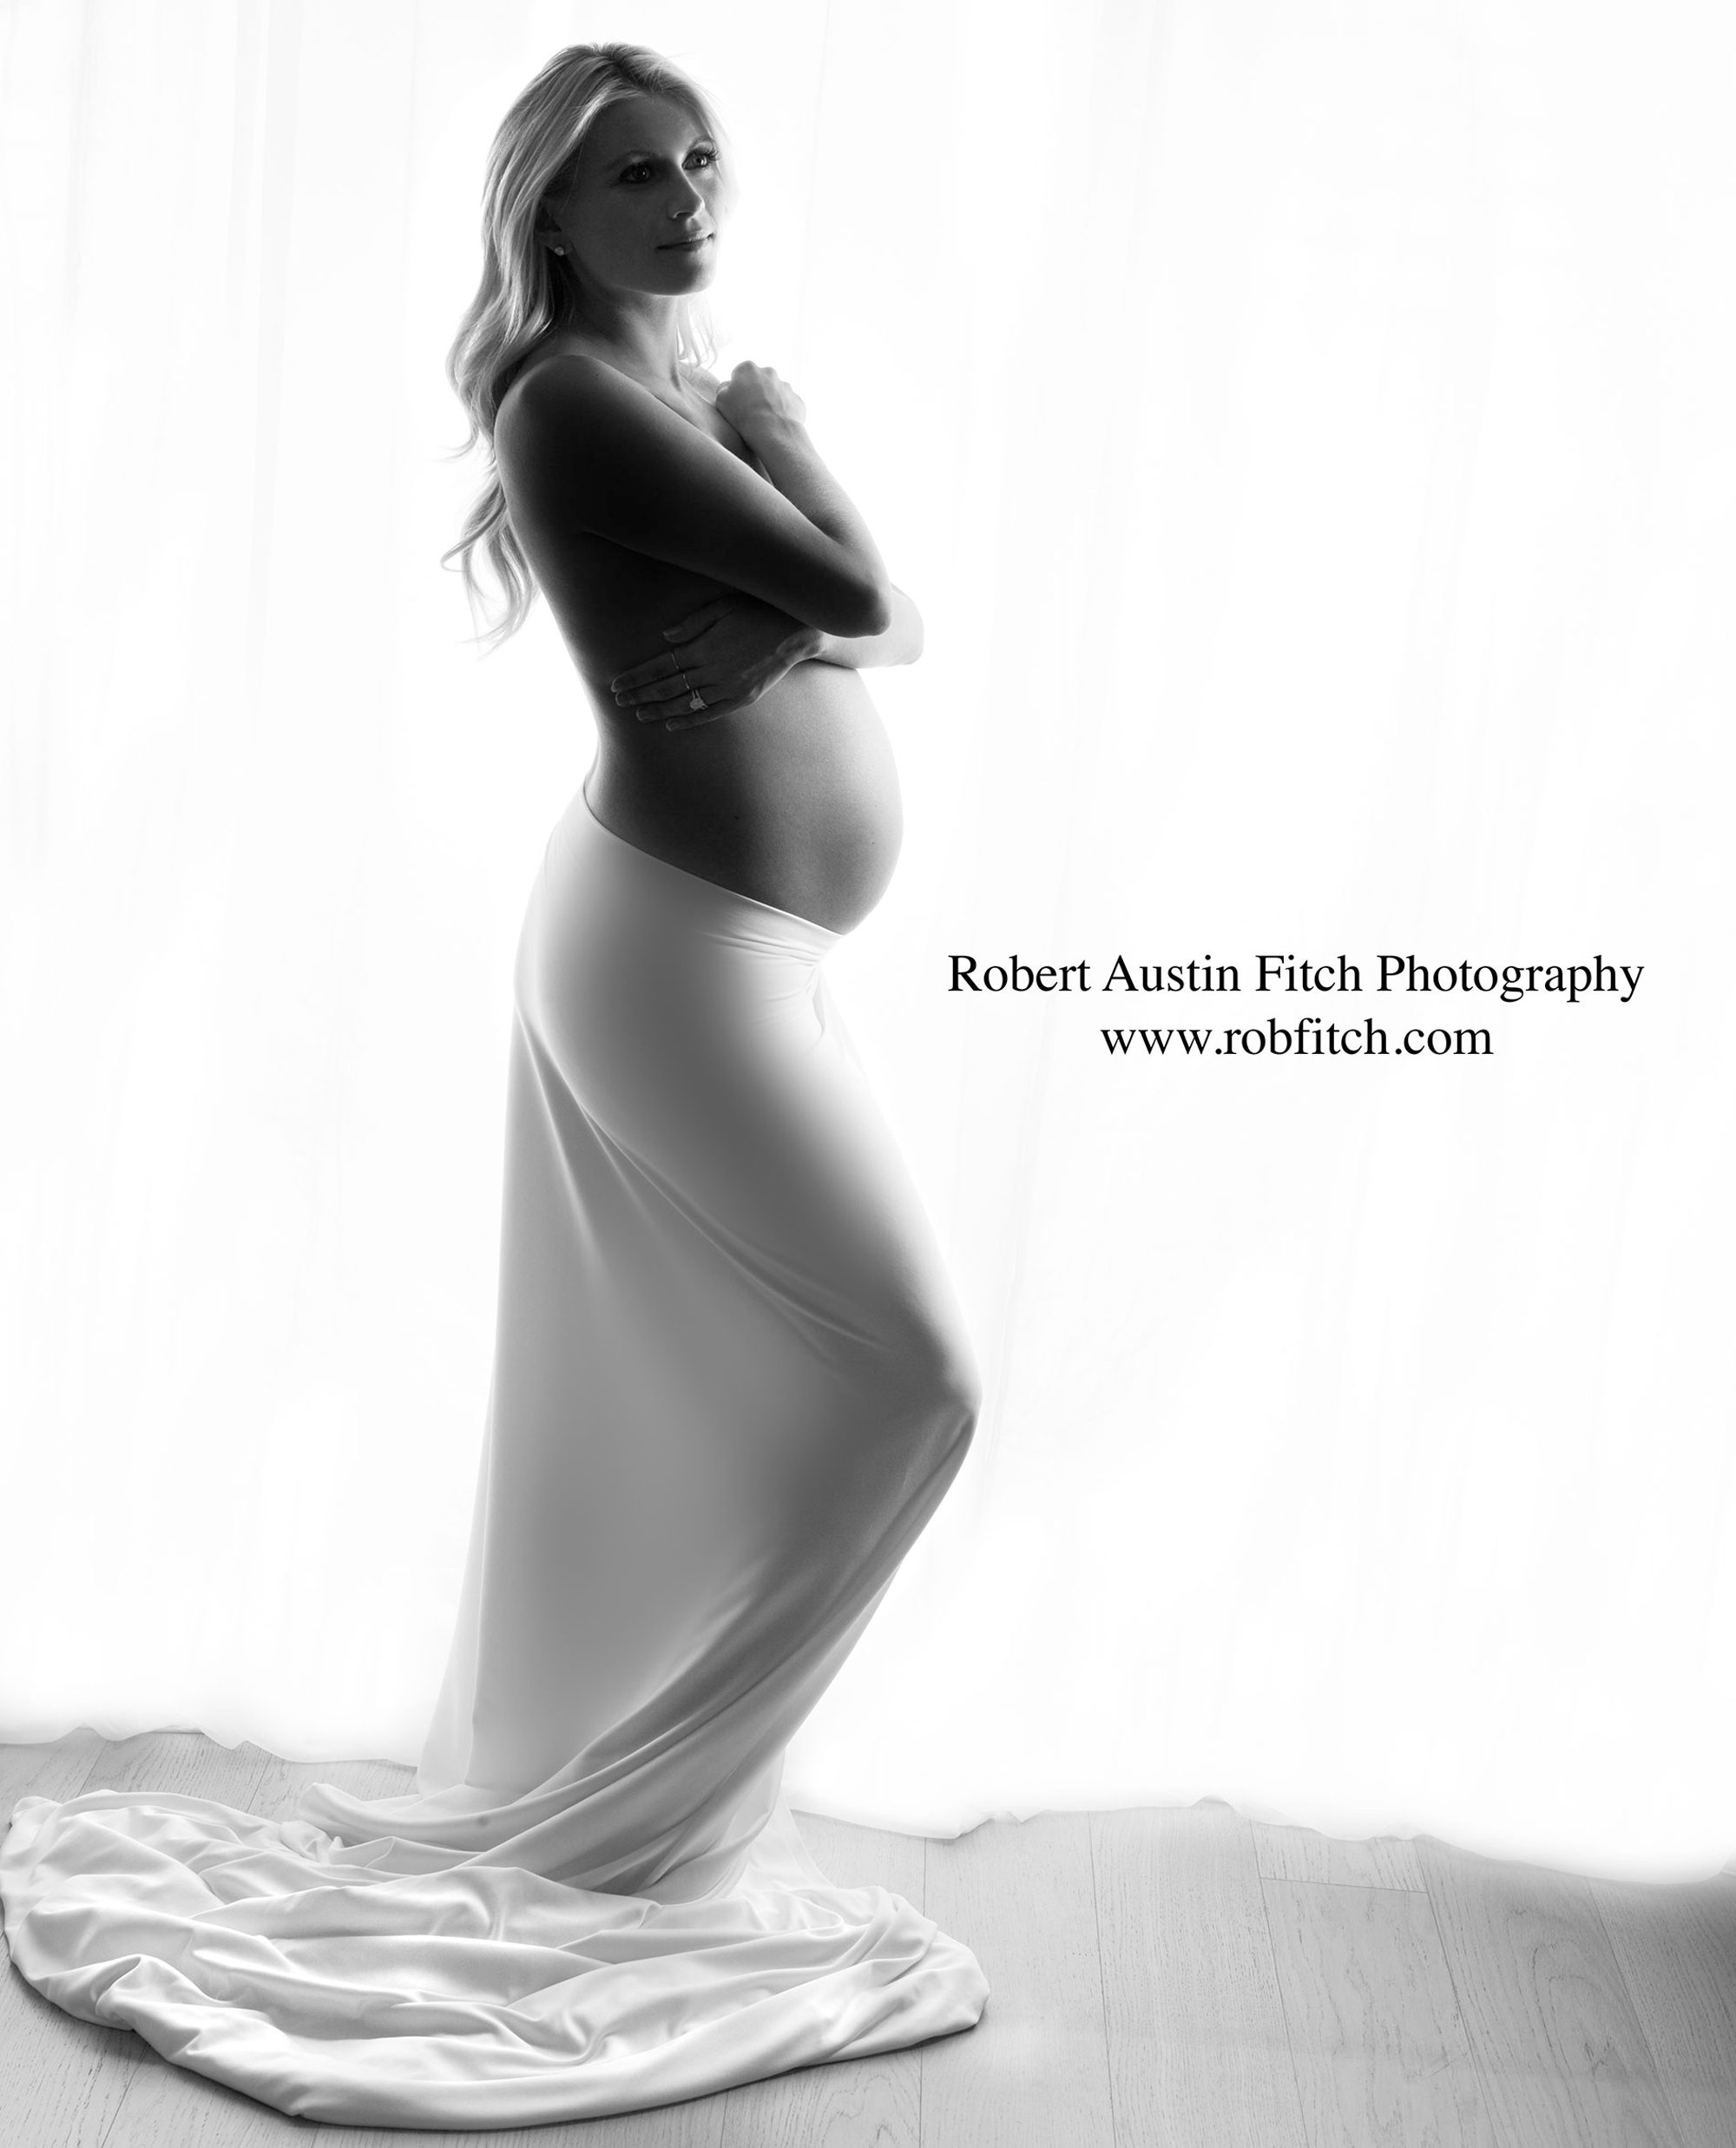 B&W silhouette maternity photo of pregnant woman with white fabric draped around her waist